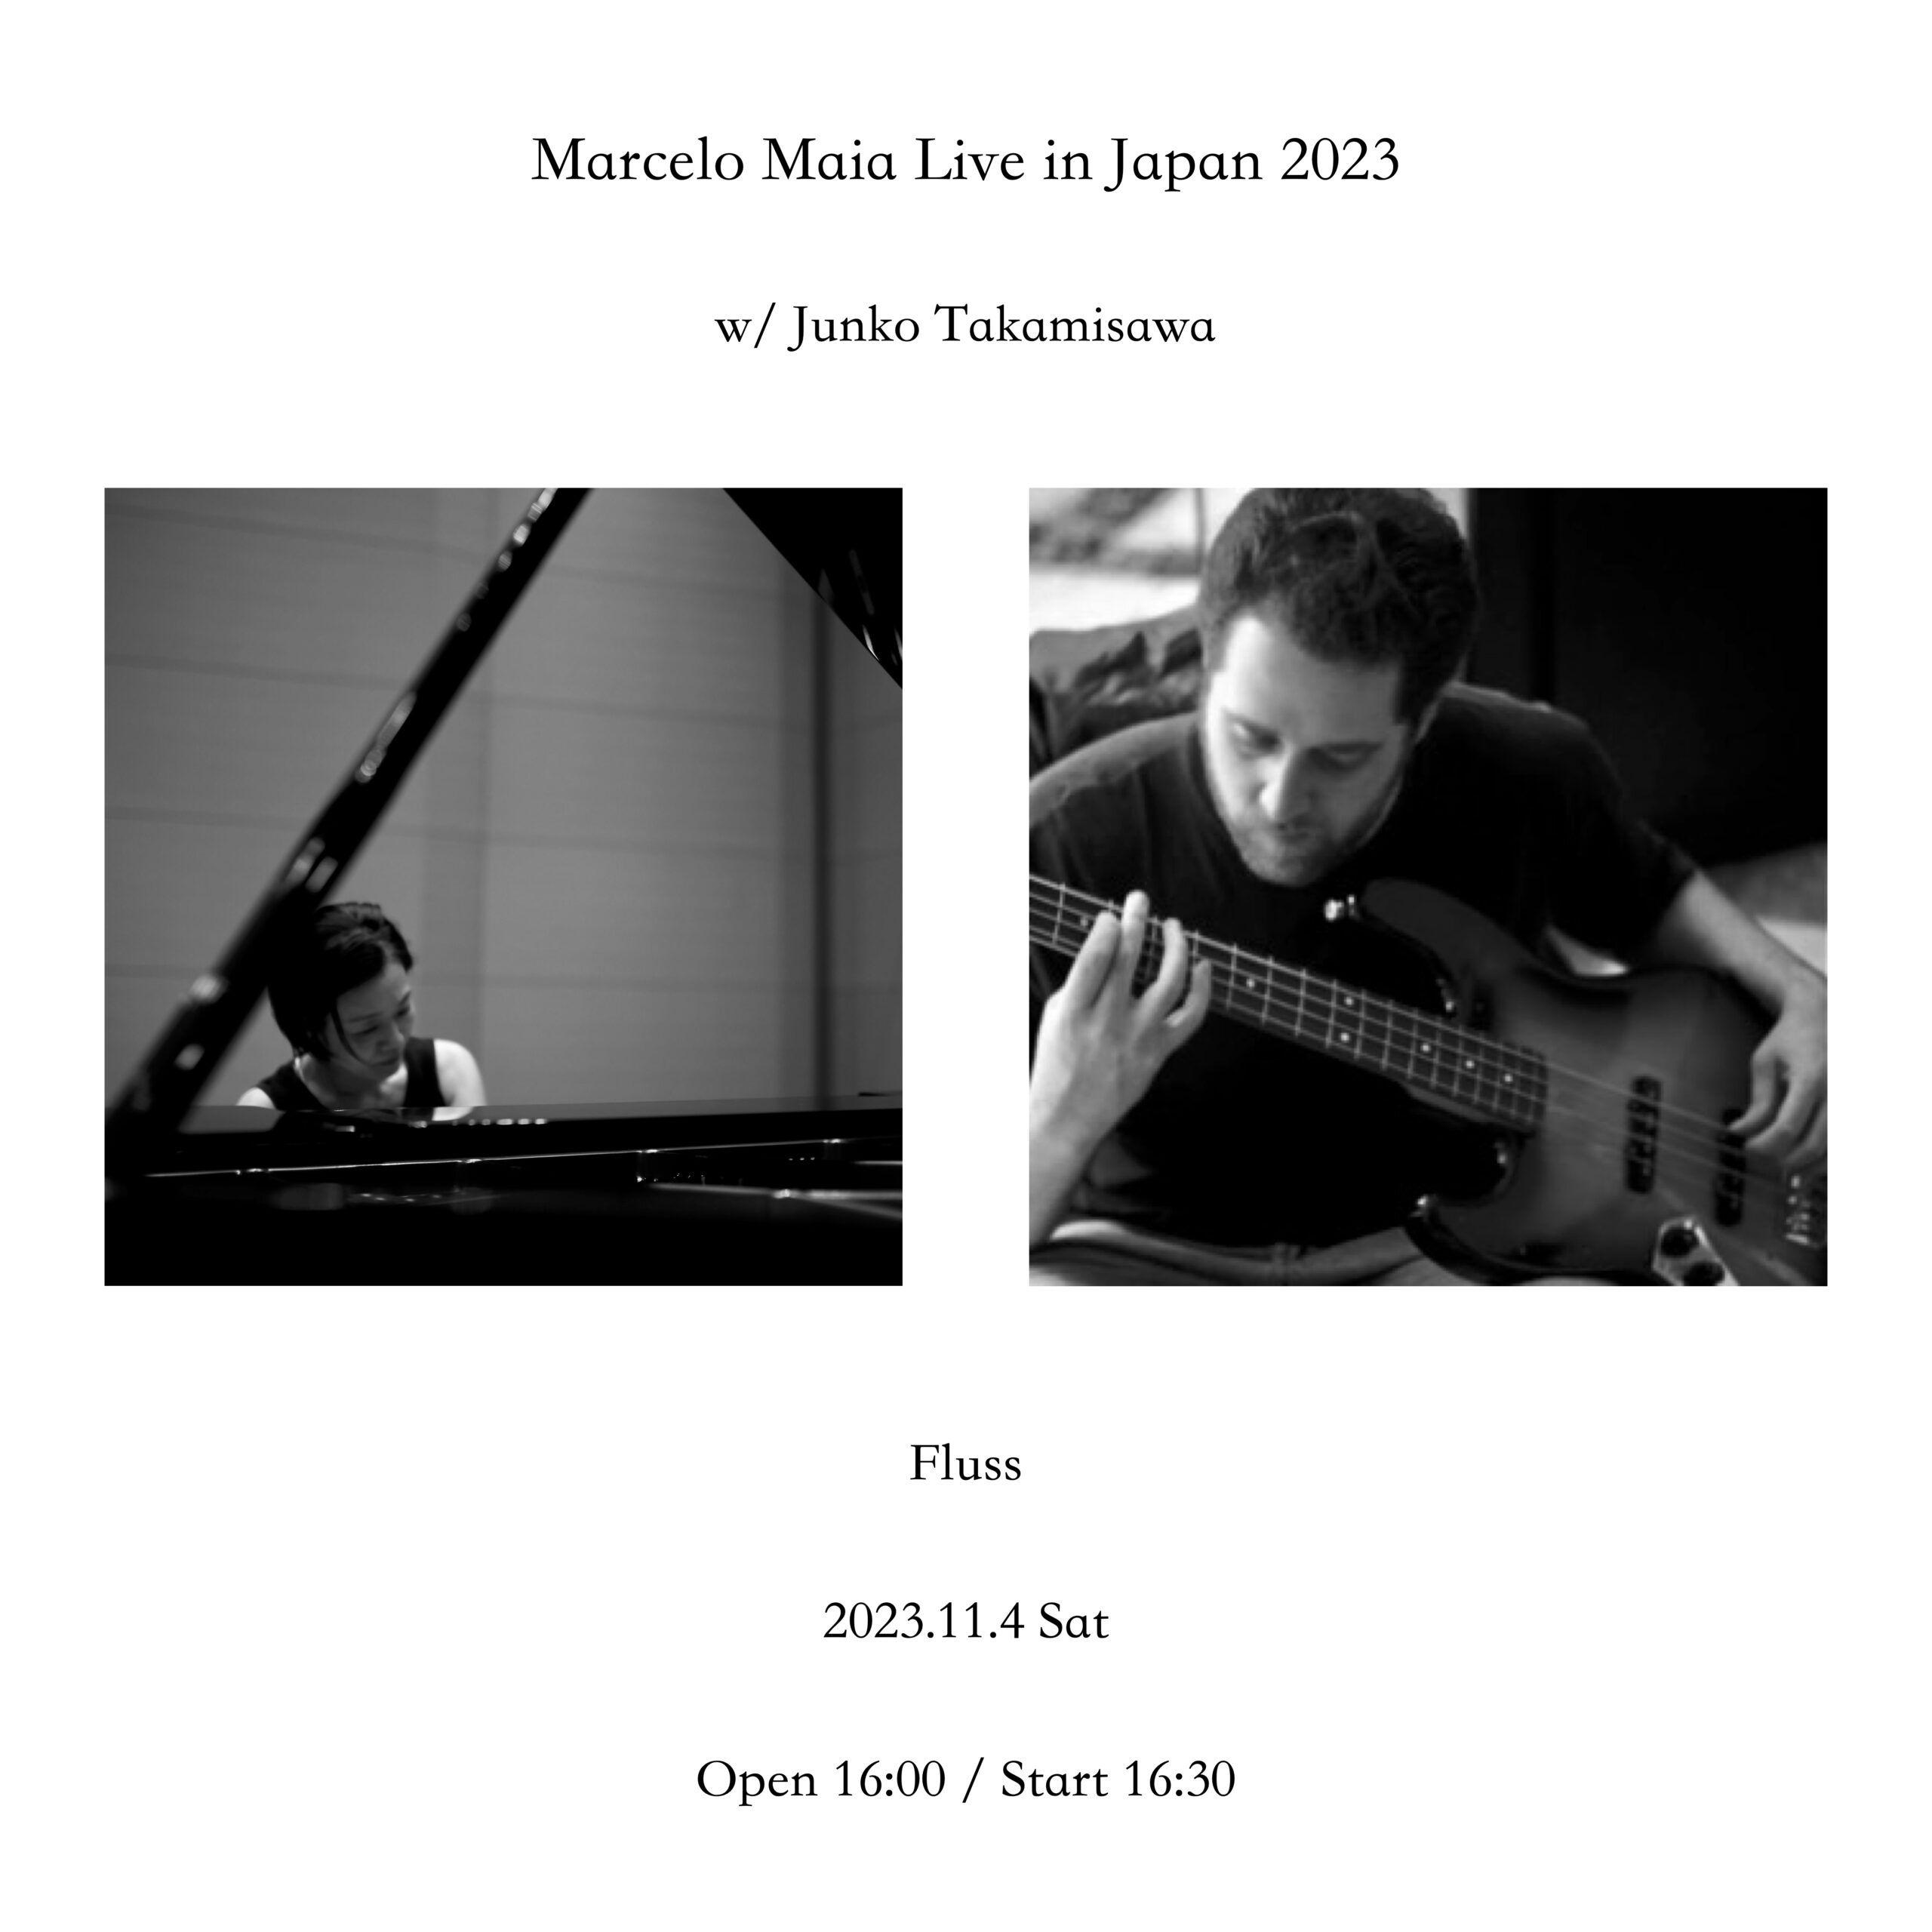 Marcelo Maia Live in Japan 2023 with Junko Takamisawa